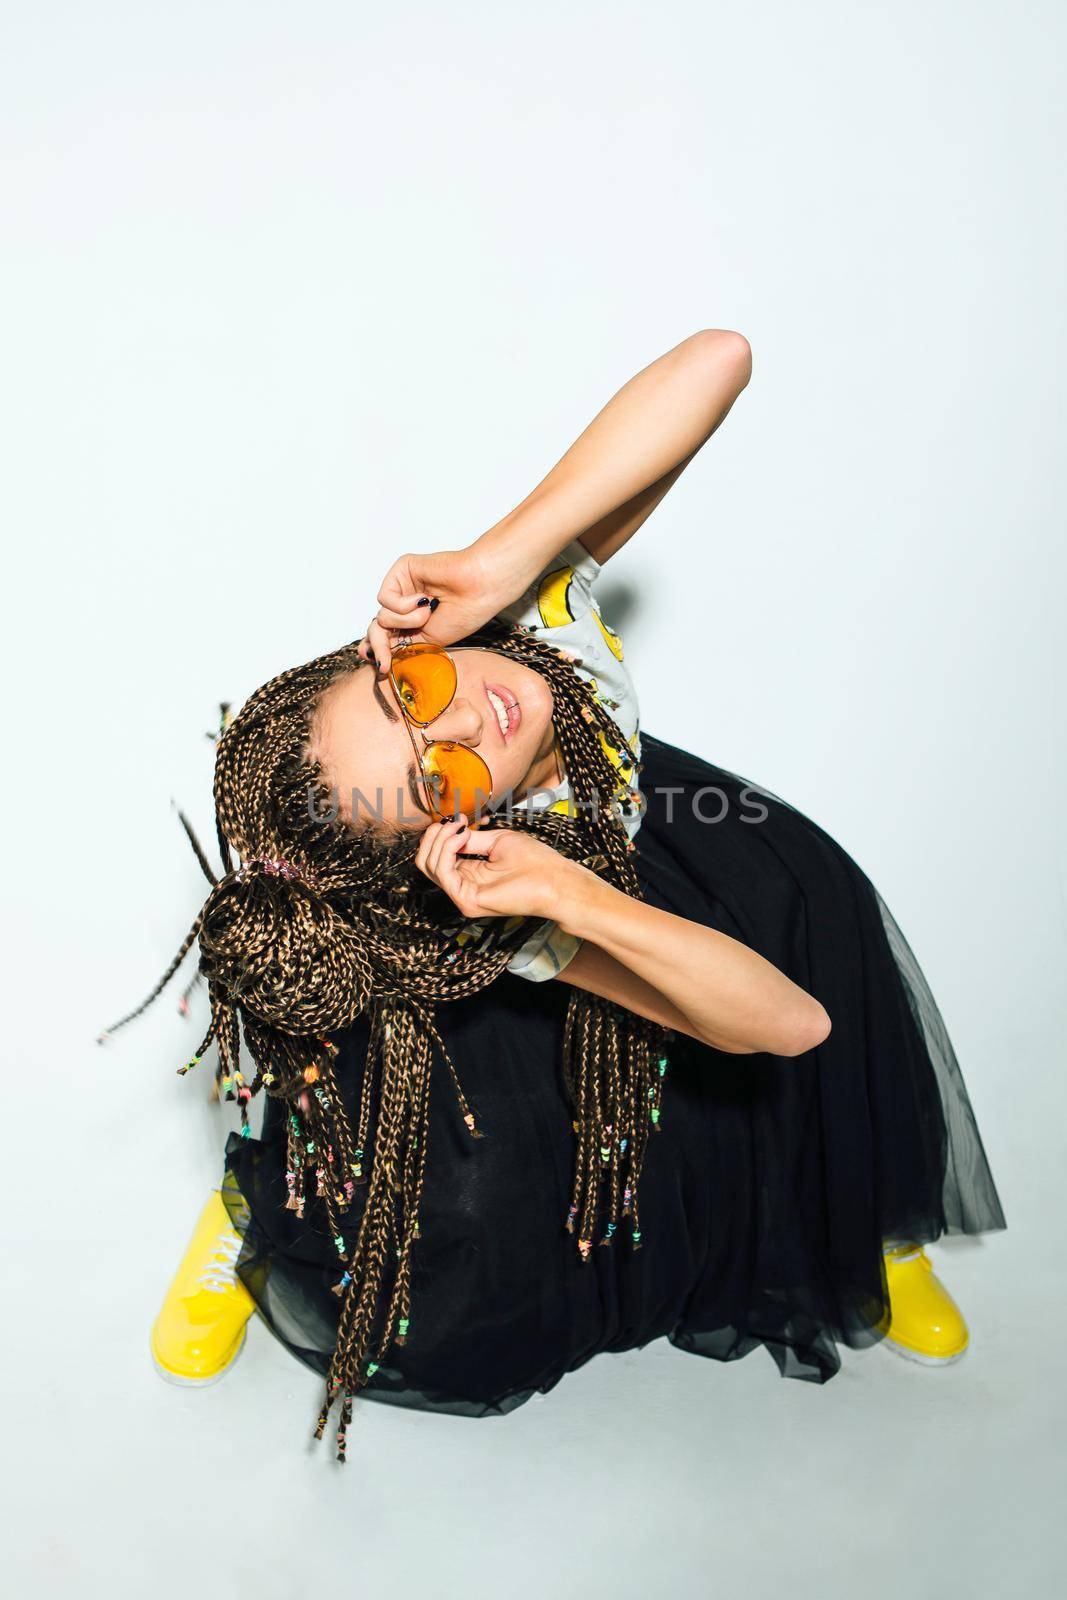 Portrait of a young stylish woman with braided hair dressed in white t-shirt, black skirt, yellow boots and sunglasses posing on the white background.